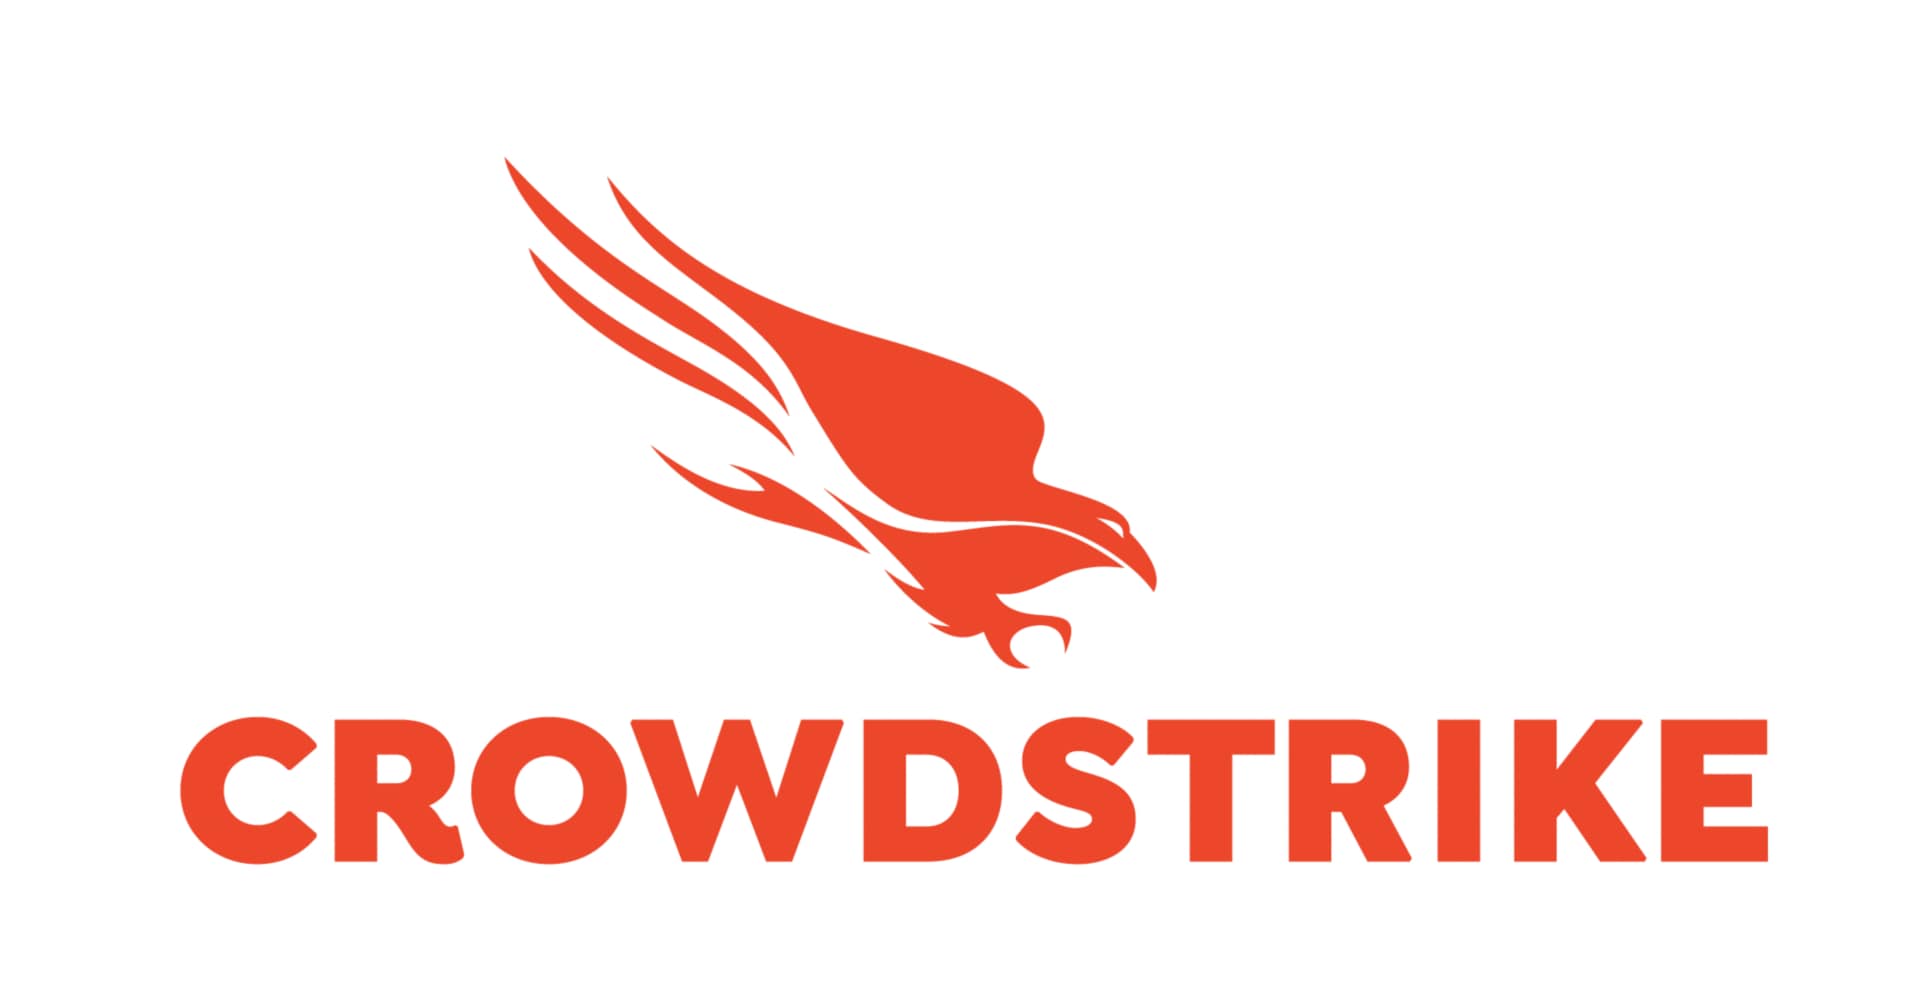 CrowdStrike Falcon Complete: CID Management (Complimentary) Software